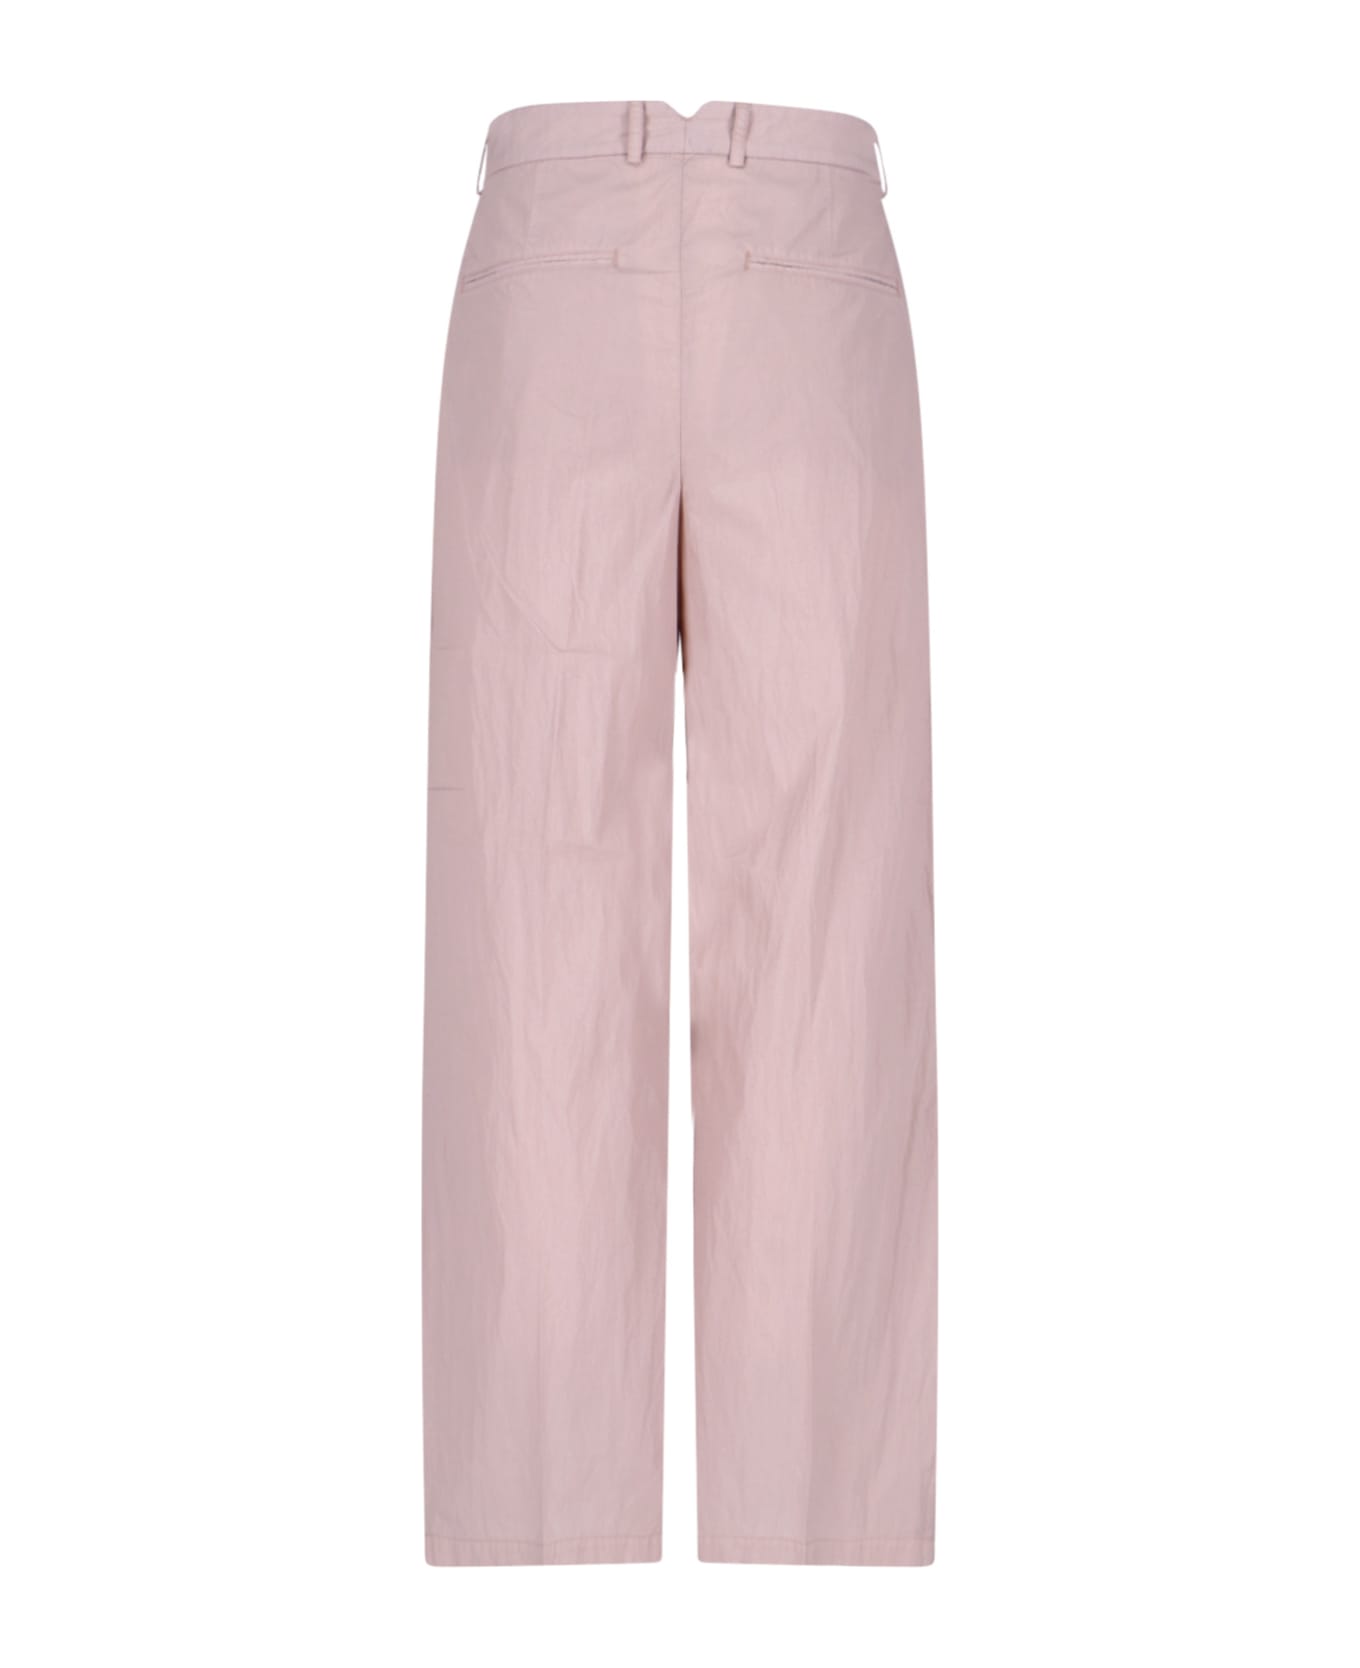 Our Legacy 'cheerful' Pants - Pink